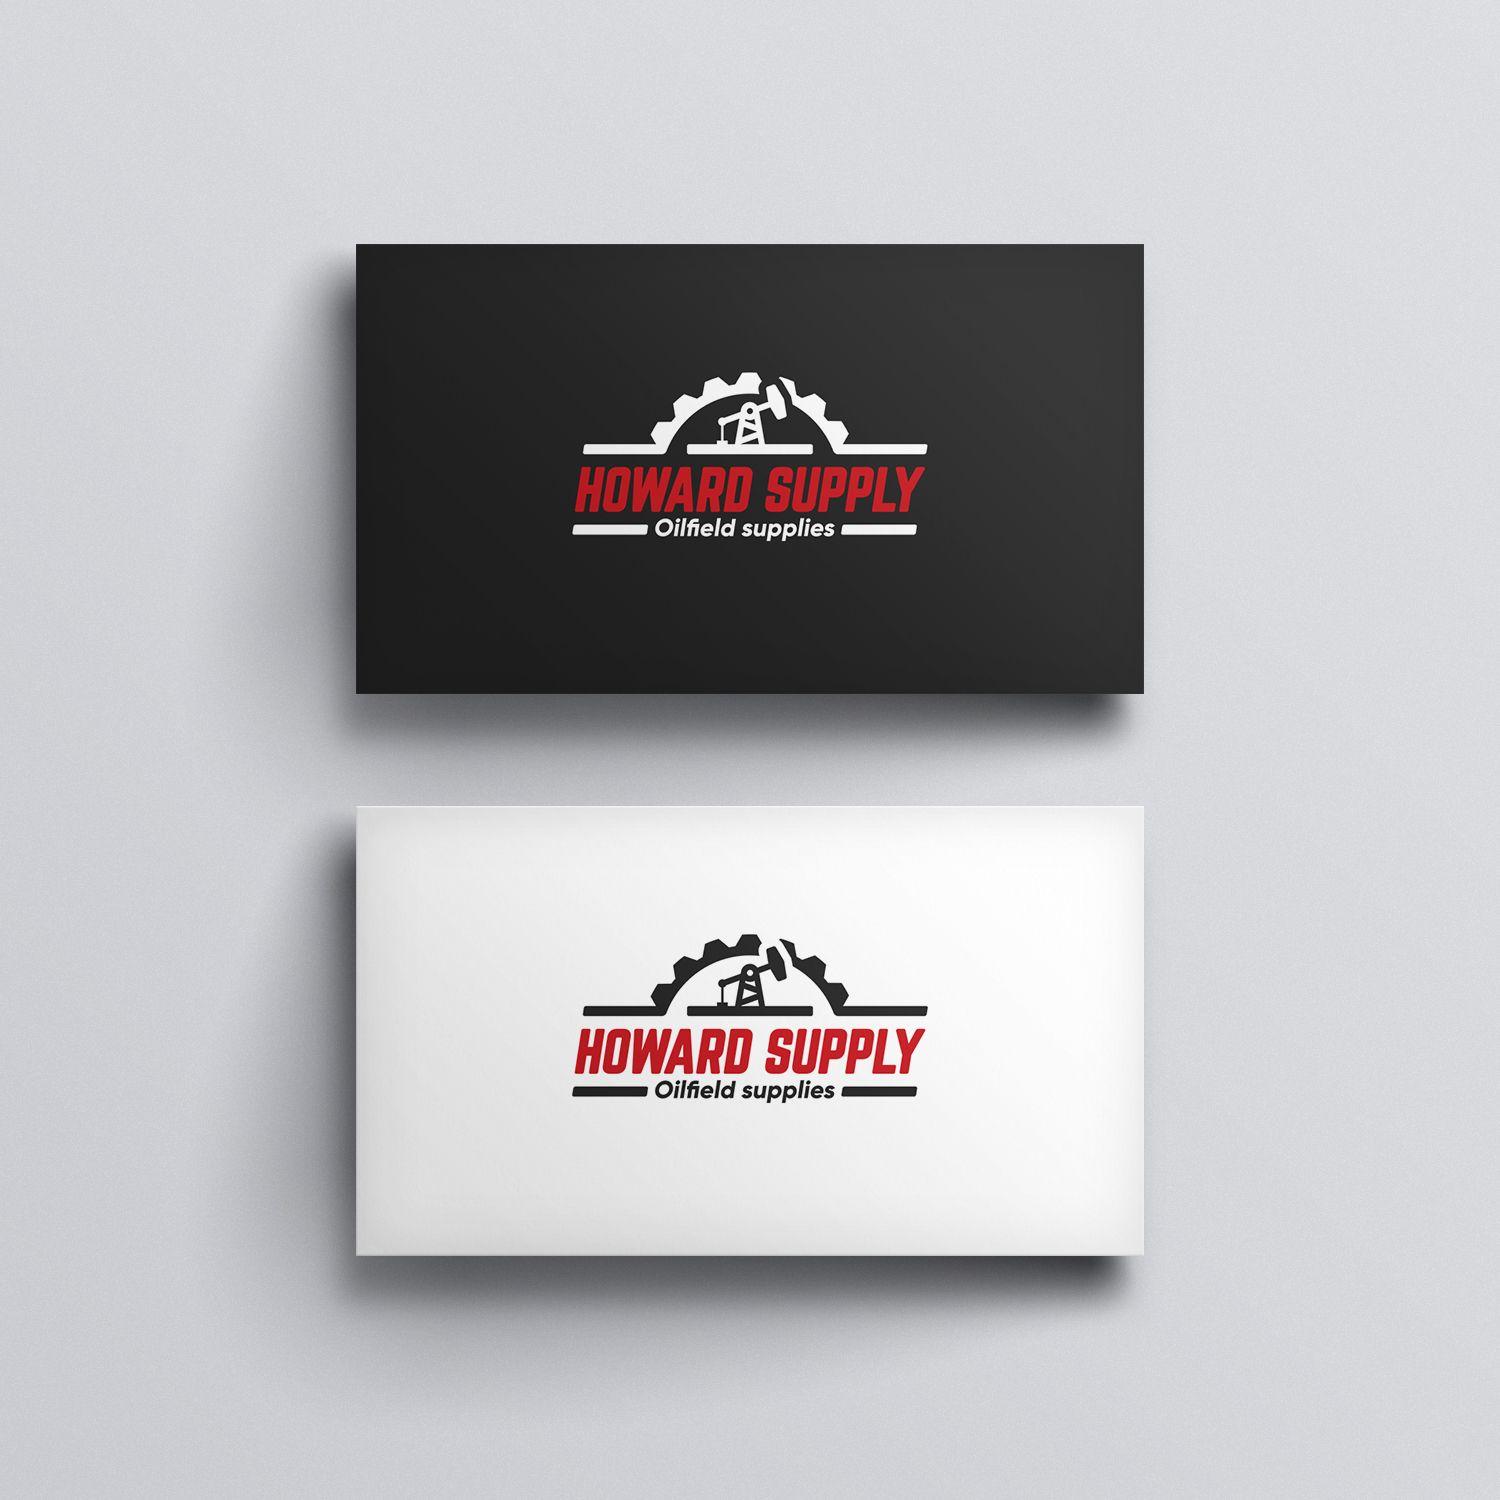 Howard Supply Logo - Friendly Logo Designs. Logo Design Project for a Business